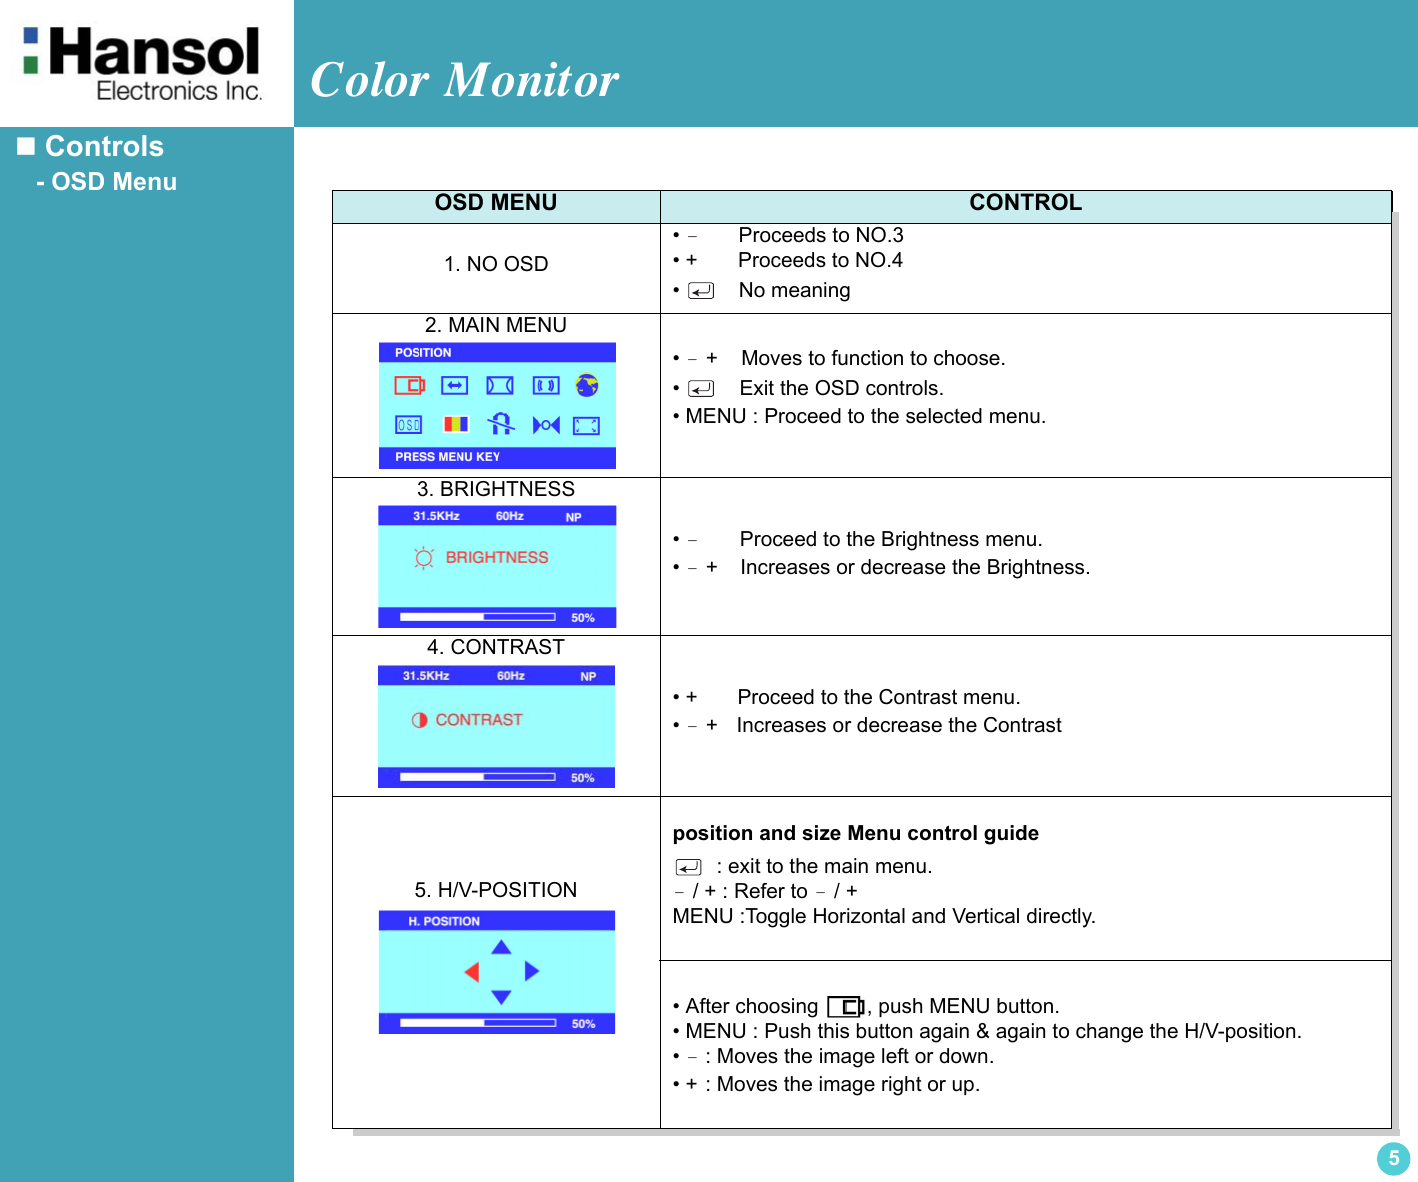 Color Monitor 5 ControlsOSD MENU  CONTROL1. NO OSD• －      Proceeds to NO.3• +       Proceeds to NO.4•     No meaning2. MAIN MENU • － +    Moves to function to choose.•     Exit the OSD controls.• MENU : Proceed to the selected menu.3. BRIGHTNESS • －      Proceed to the Brightness menu.• － +    Increases or decrease the Brightness.4. CONTRAST• +      Proceed to the Contrast menu.• － +   Increases or decrease the Contrast5. H/V-POSITION position and size Menu control guide  : exit to the main menu.－ / + : Refer to － / + MENU :Toggle Horizontal and Vertical directly.• After choosing  , push MENU button.• MENU : Push this button again &amp; again to change the H/V-position.• －: Moves the image left or down. • + : Moves the image right or up.   - OSD Menu